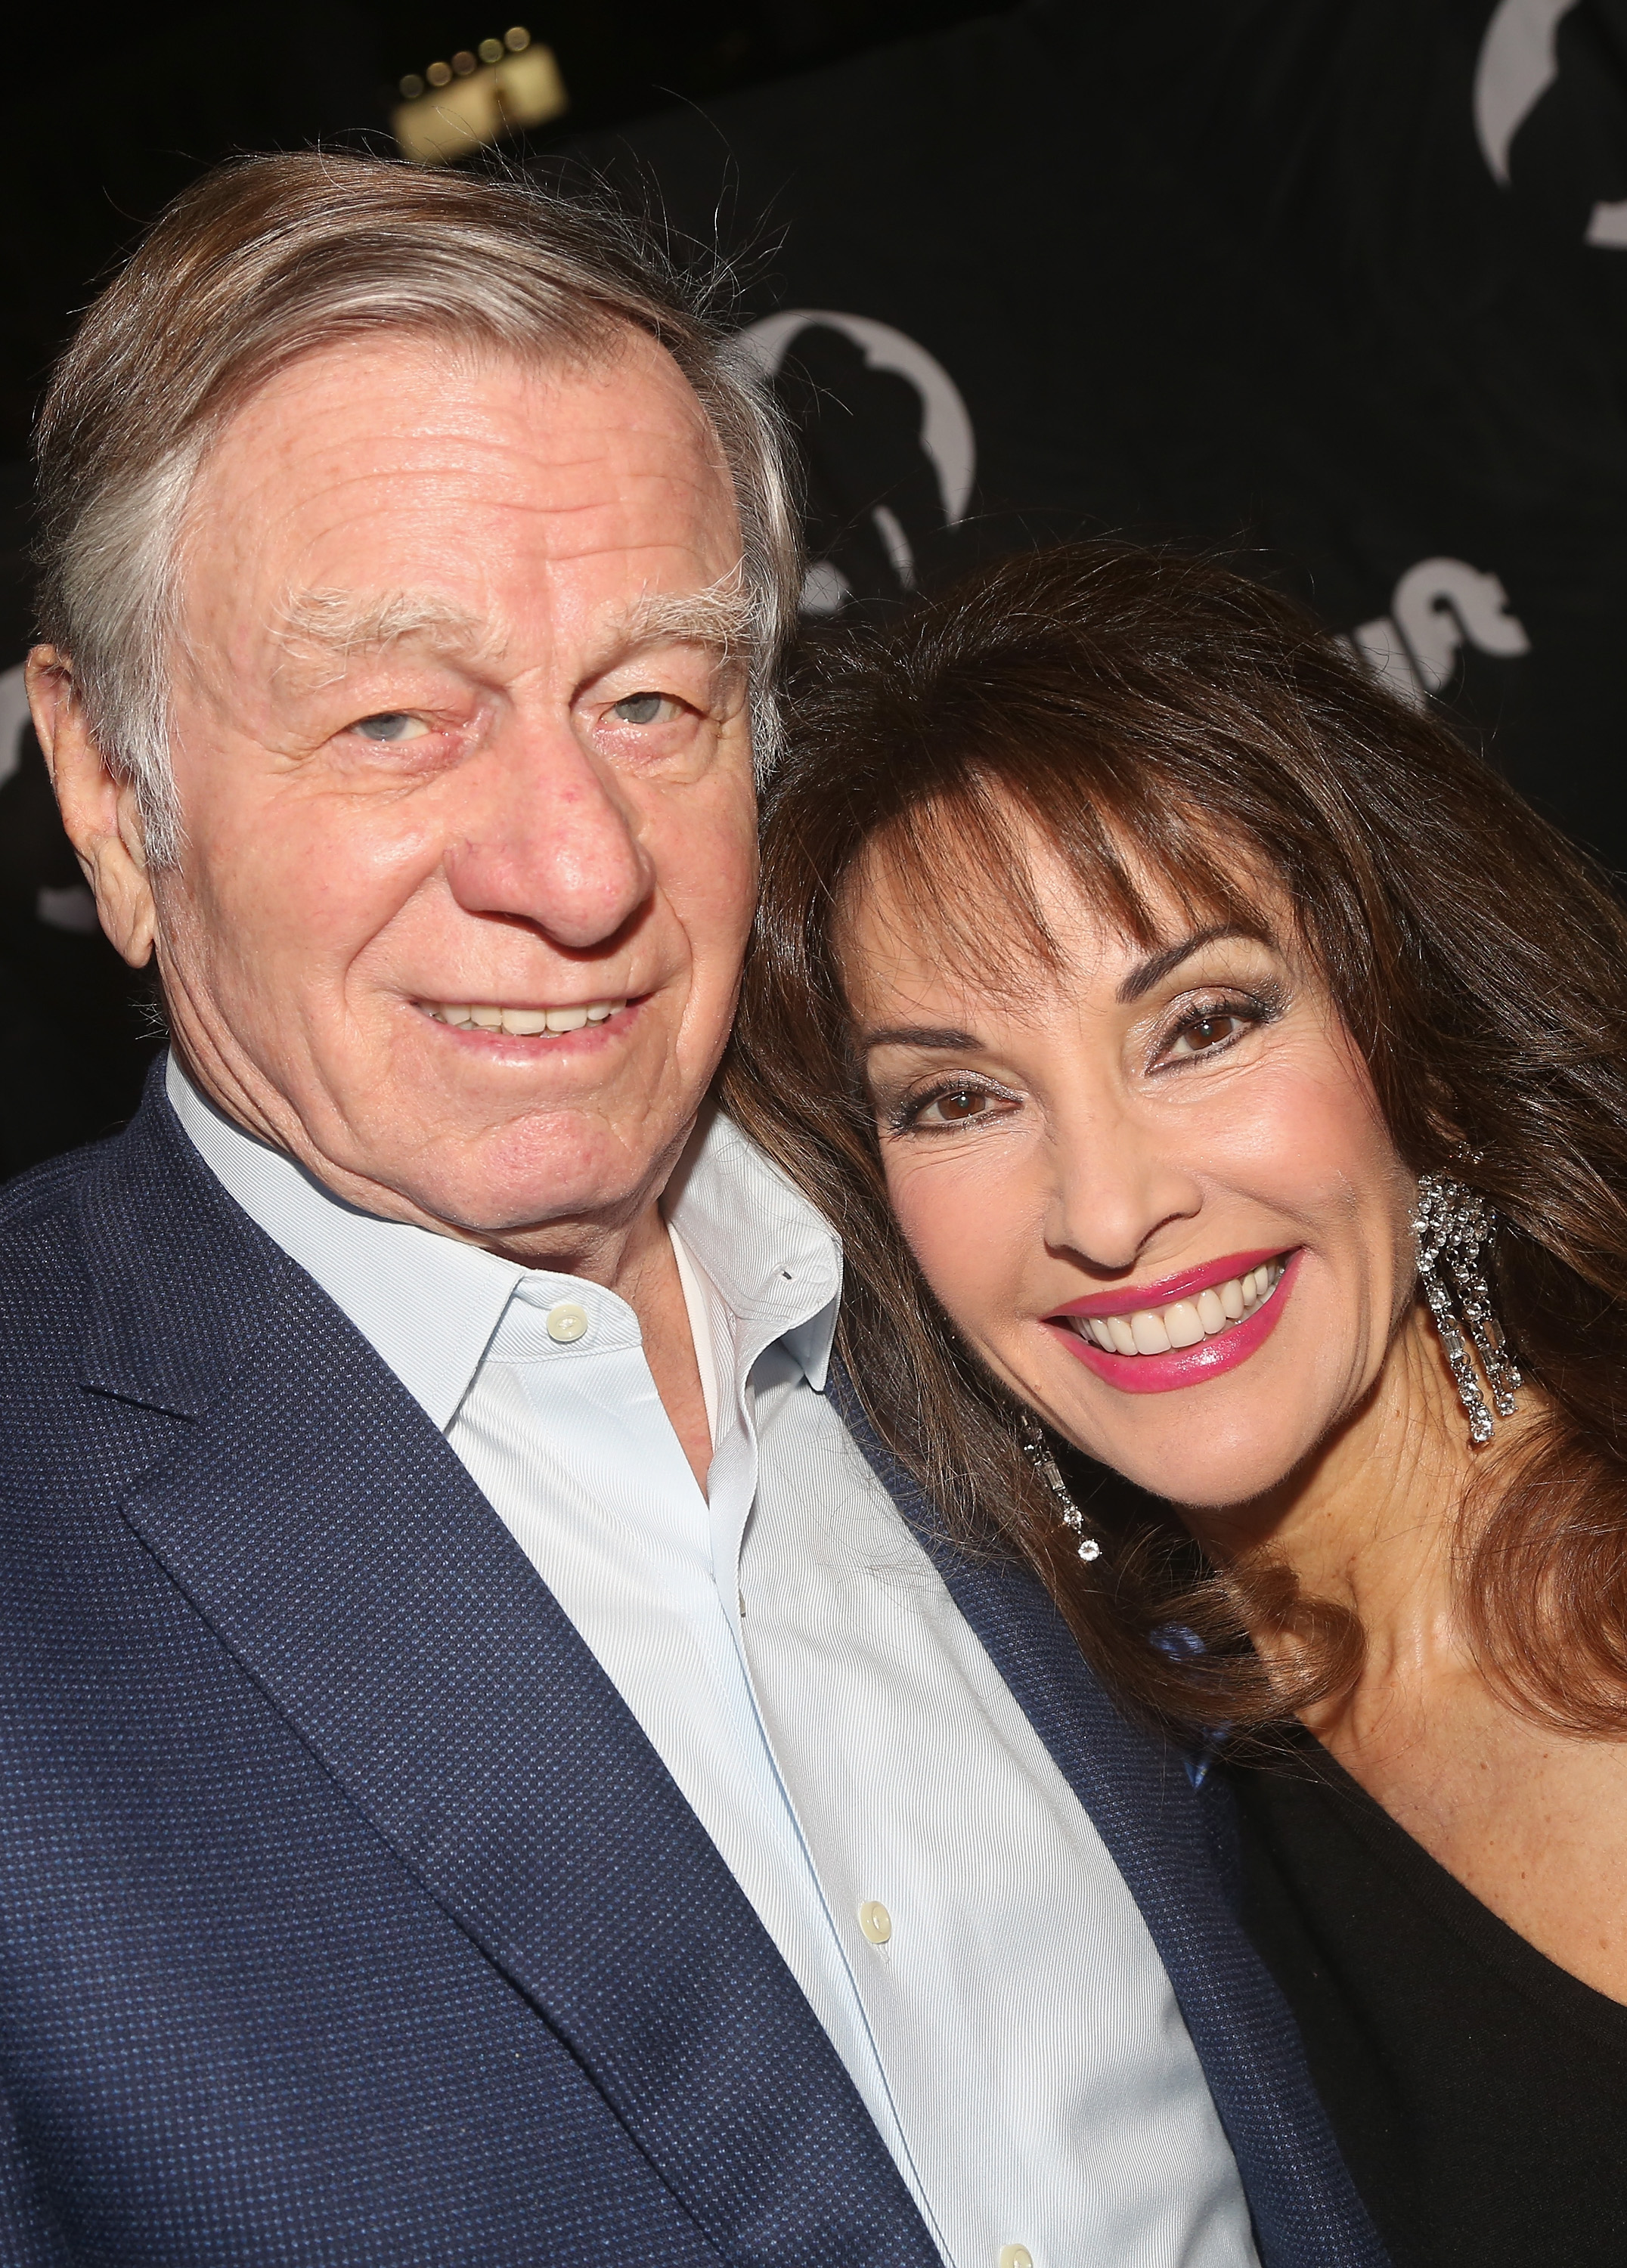 Helmut Huber and Susan Lucci posing at the opening night of "King Kong" on Broadway at The Broadway Theatre in New York City on November 8, 2018 | Source: Getty Images